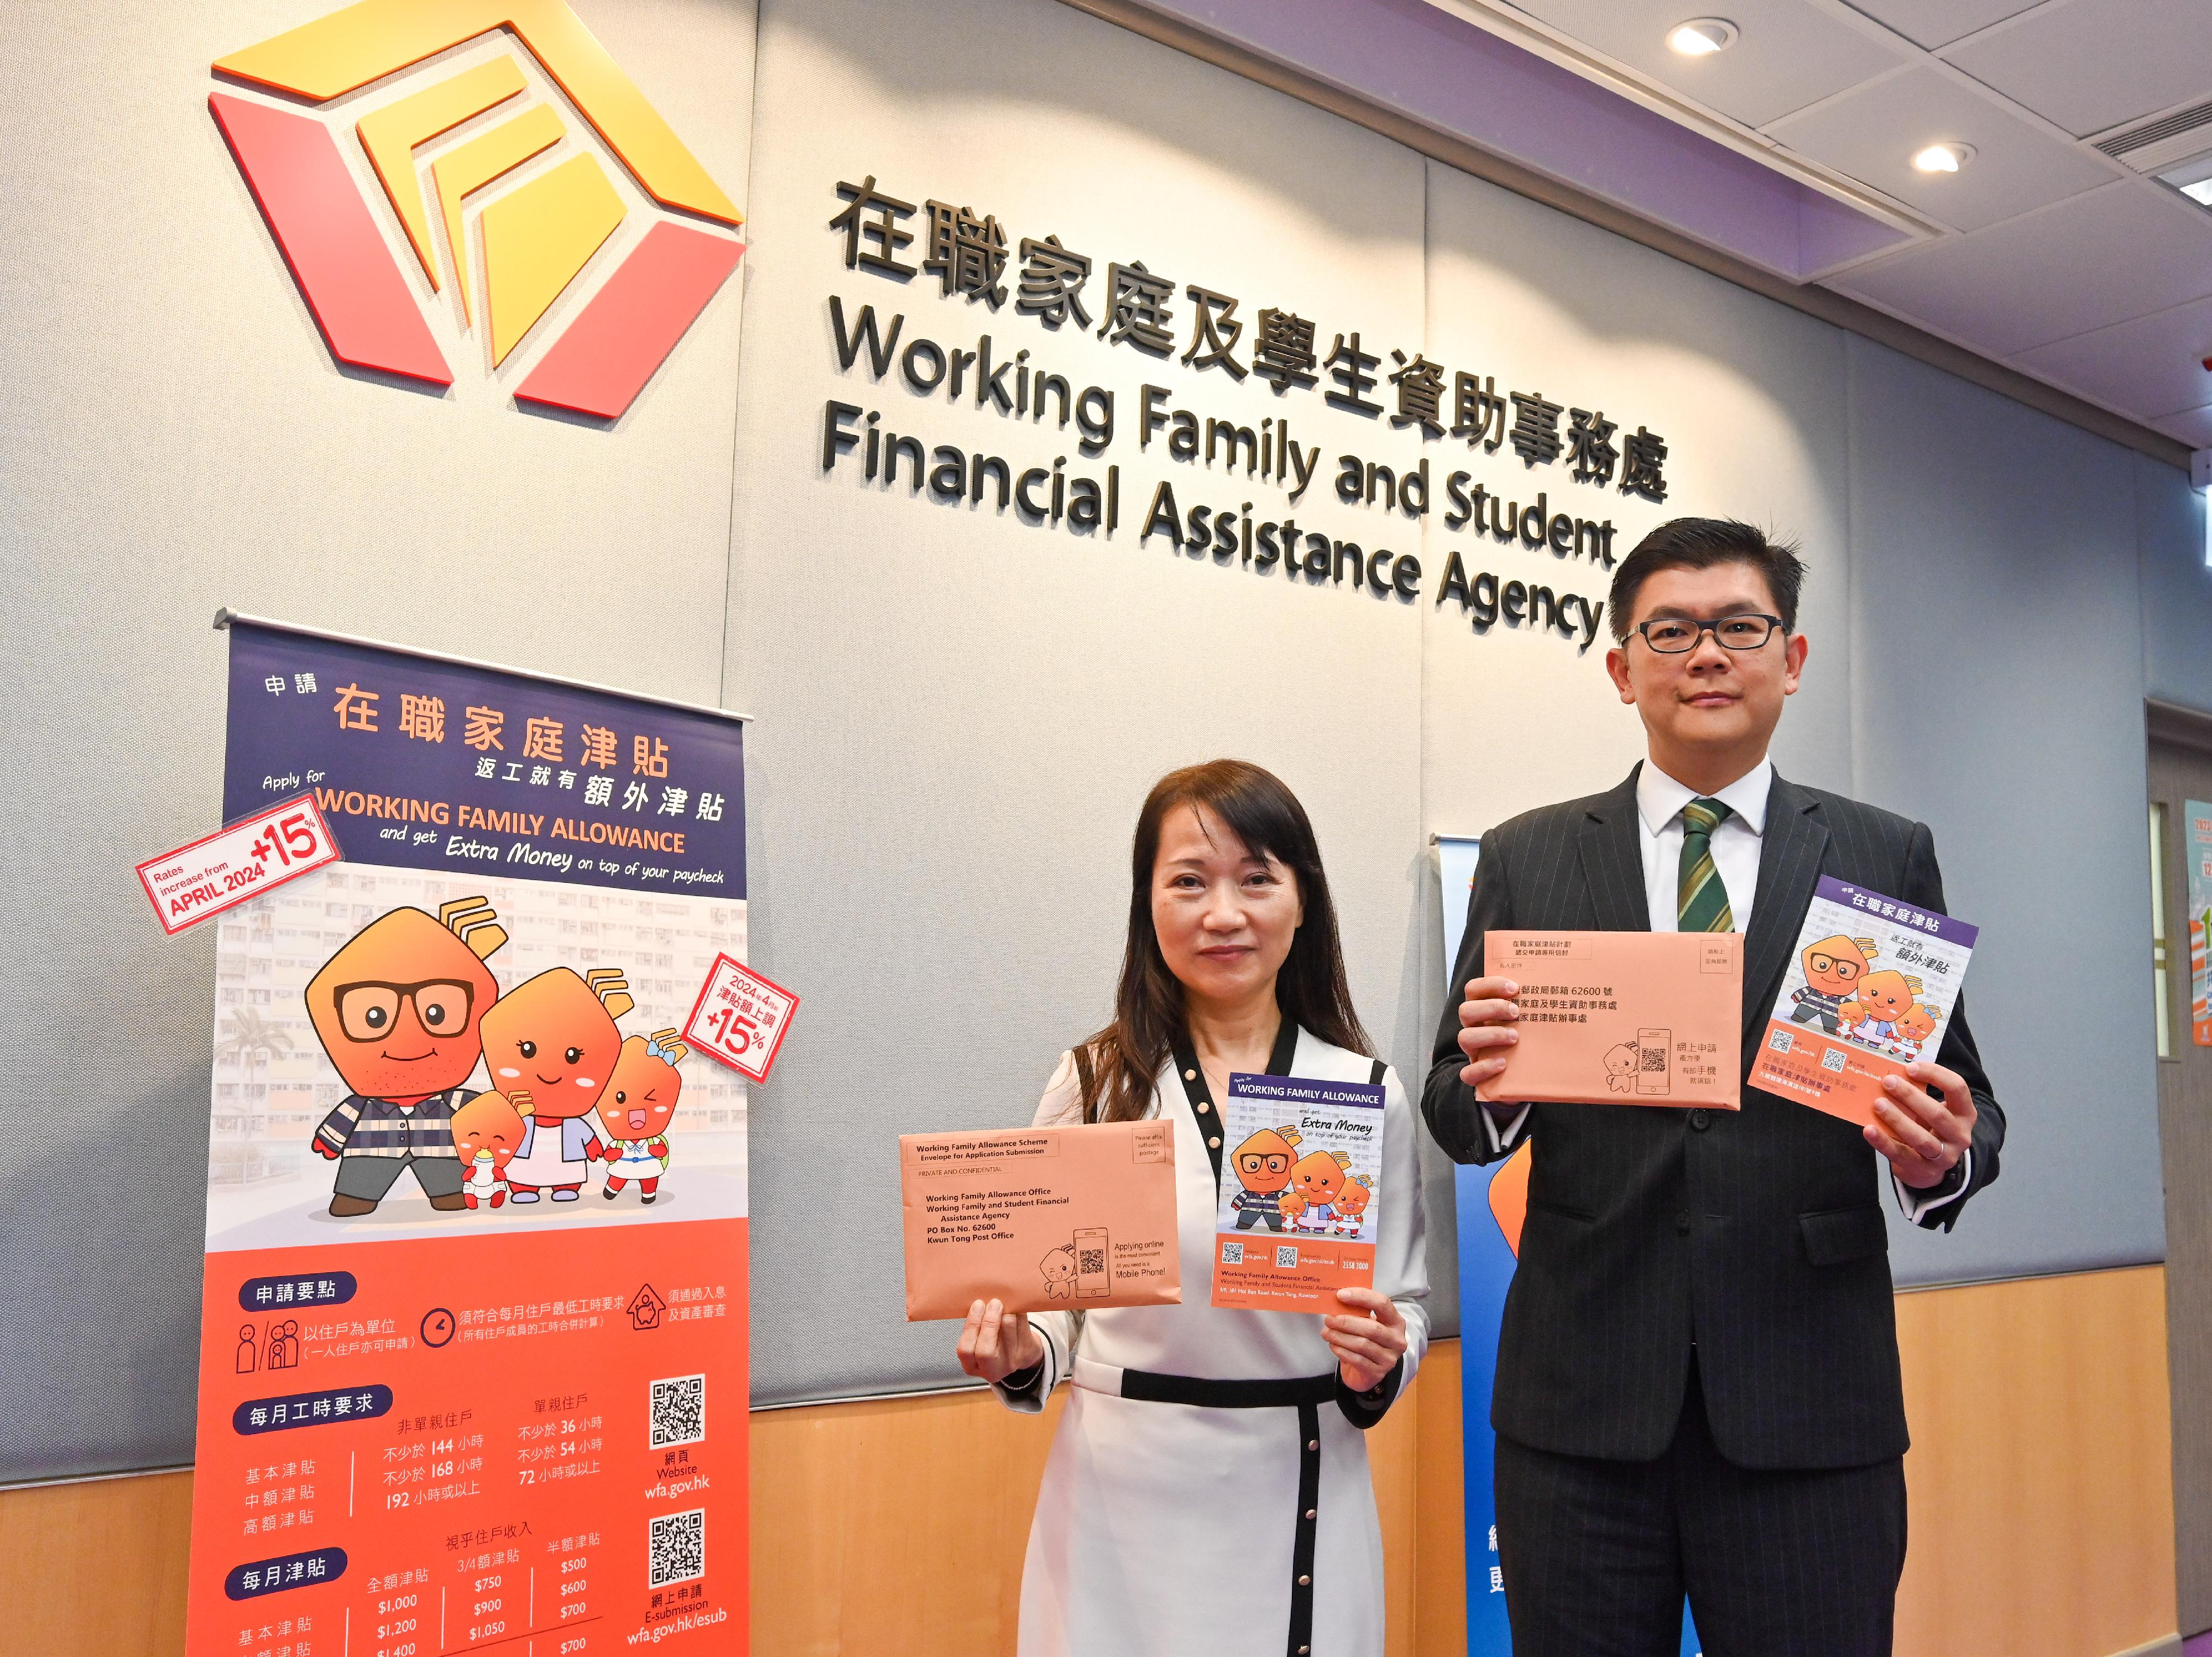 The Head of the Working Family and Student Financial Assistance Agency (WFSFAA), Mr Andrew Tsang (right), today (November 29) said that increasing the payment rates under the Working Family Allowance Scheme would effectively strengthen the policy objectives of the Scheme to encourage continuous employment and reward hard work. The WFSFAA's mascot, S. Buddy, is featured as a family of four in newly launched leaflets and posters. Beside him is the Principal Executive Officer (Working Family Allowance Office), Miss Maria Tsie (left).